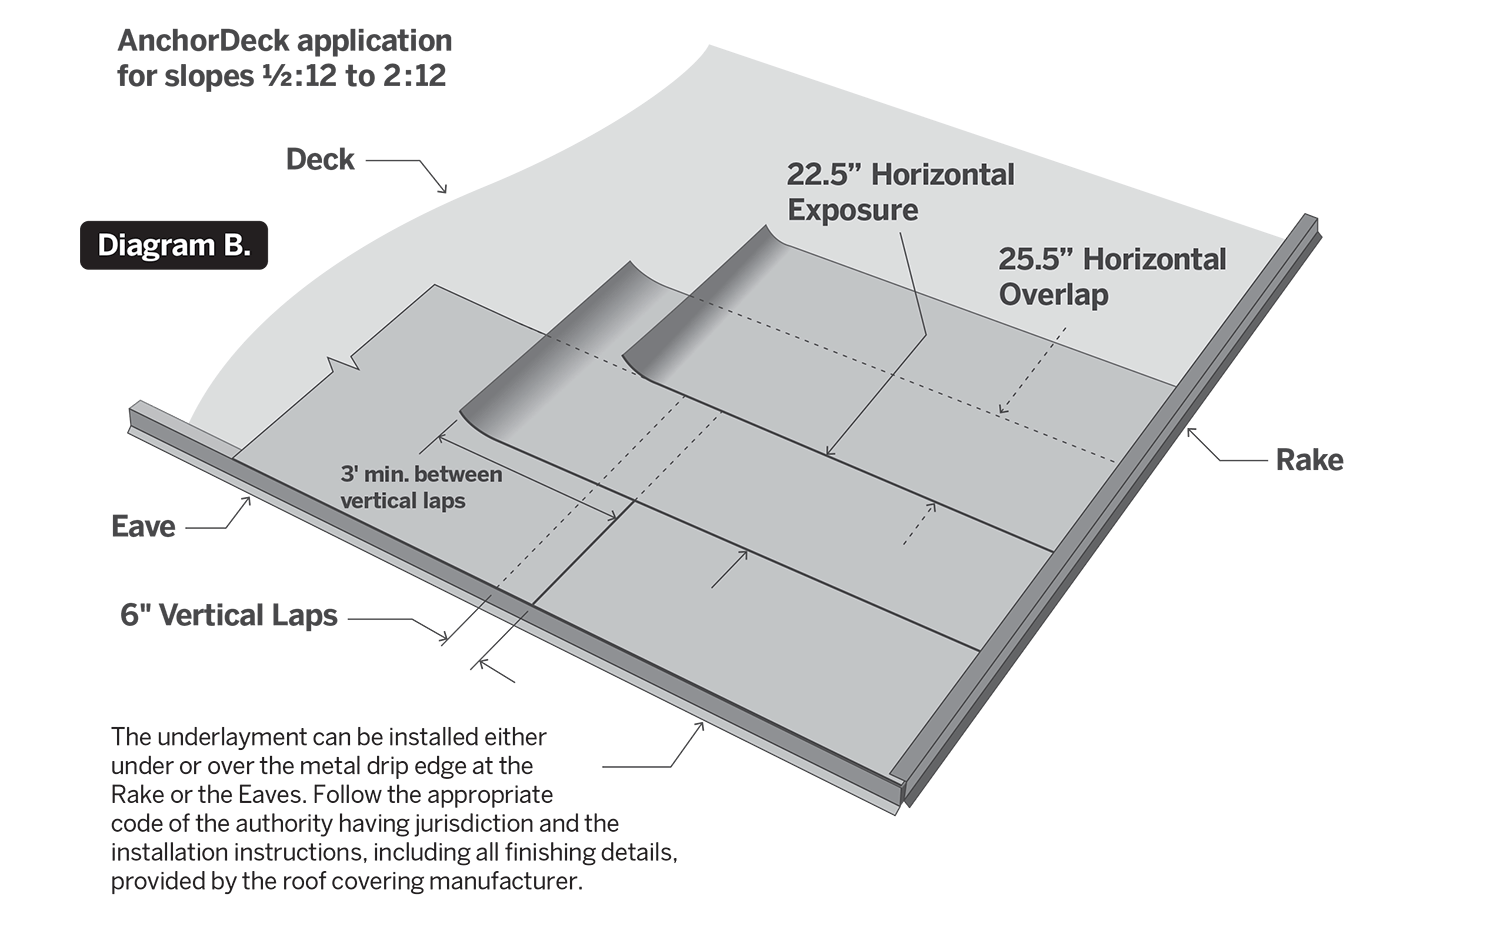 AnchorDeck installation diagram for slopes between 2:12 and 4:12